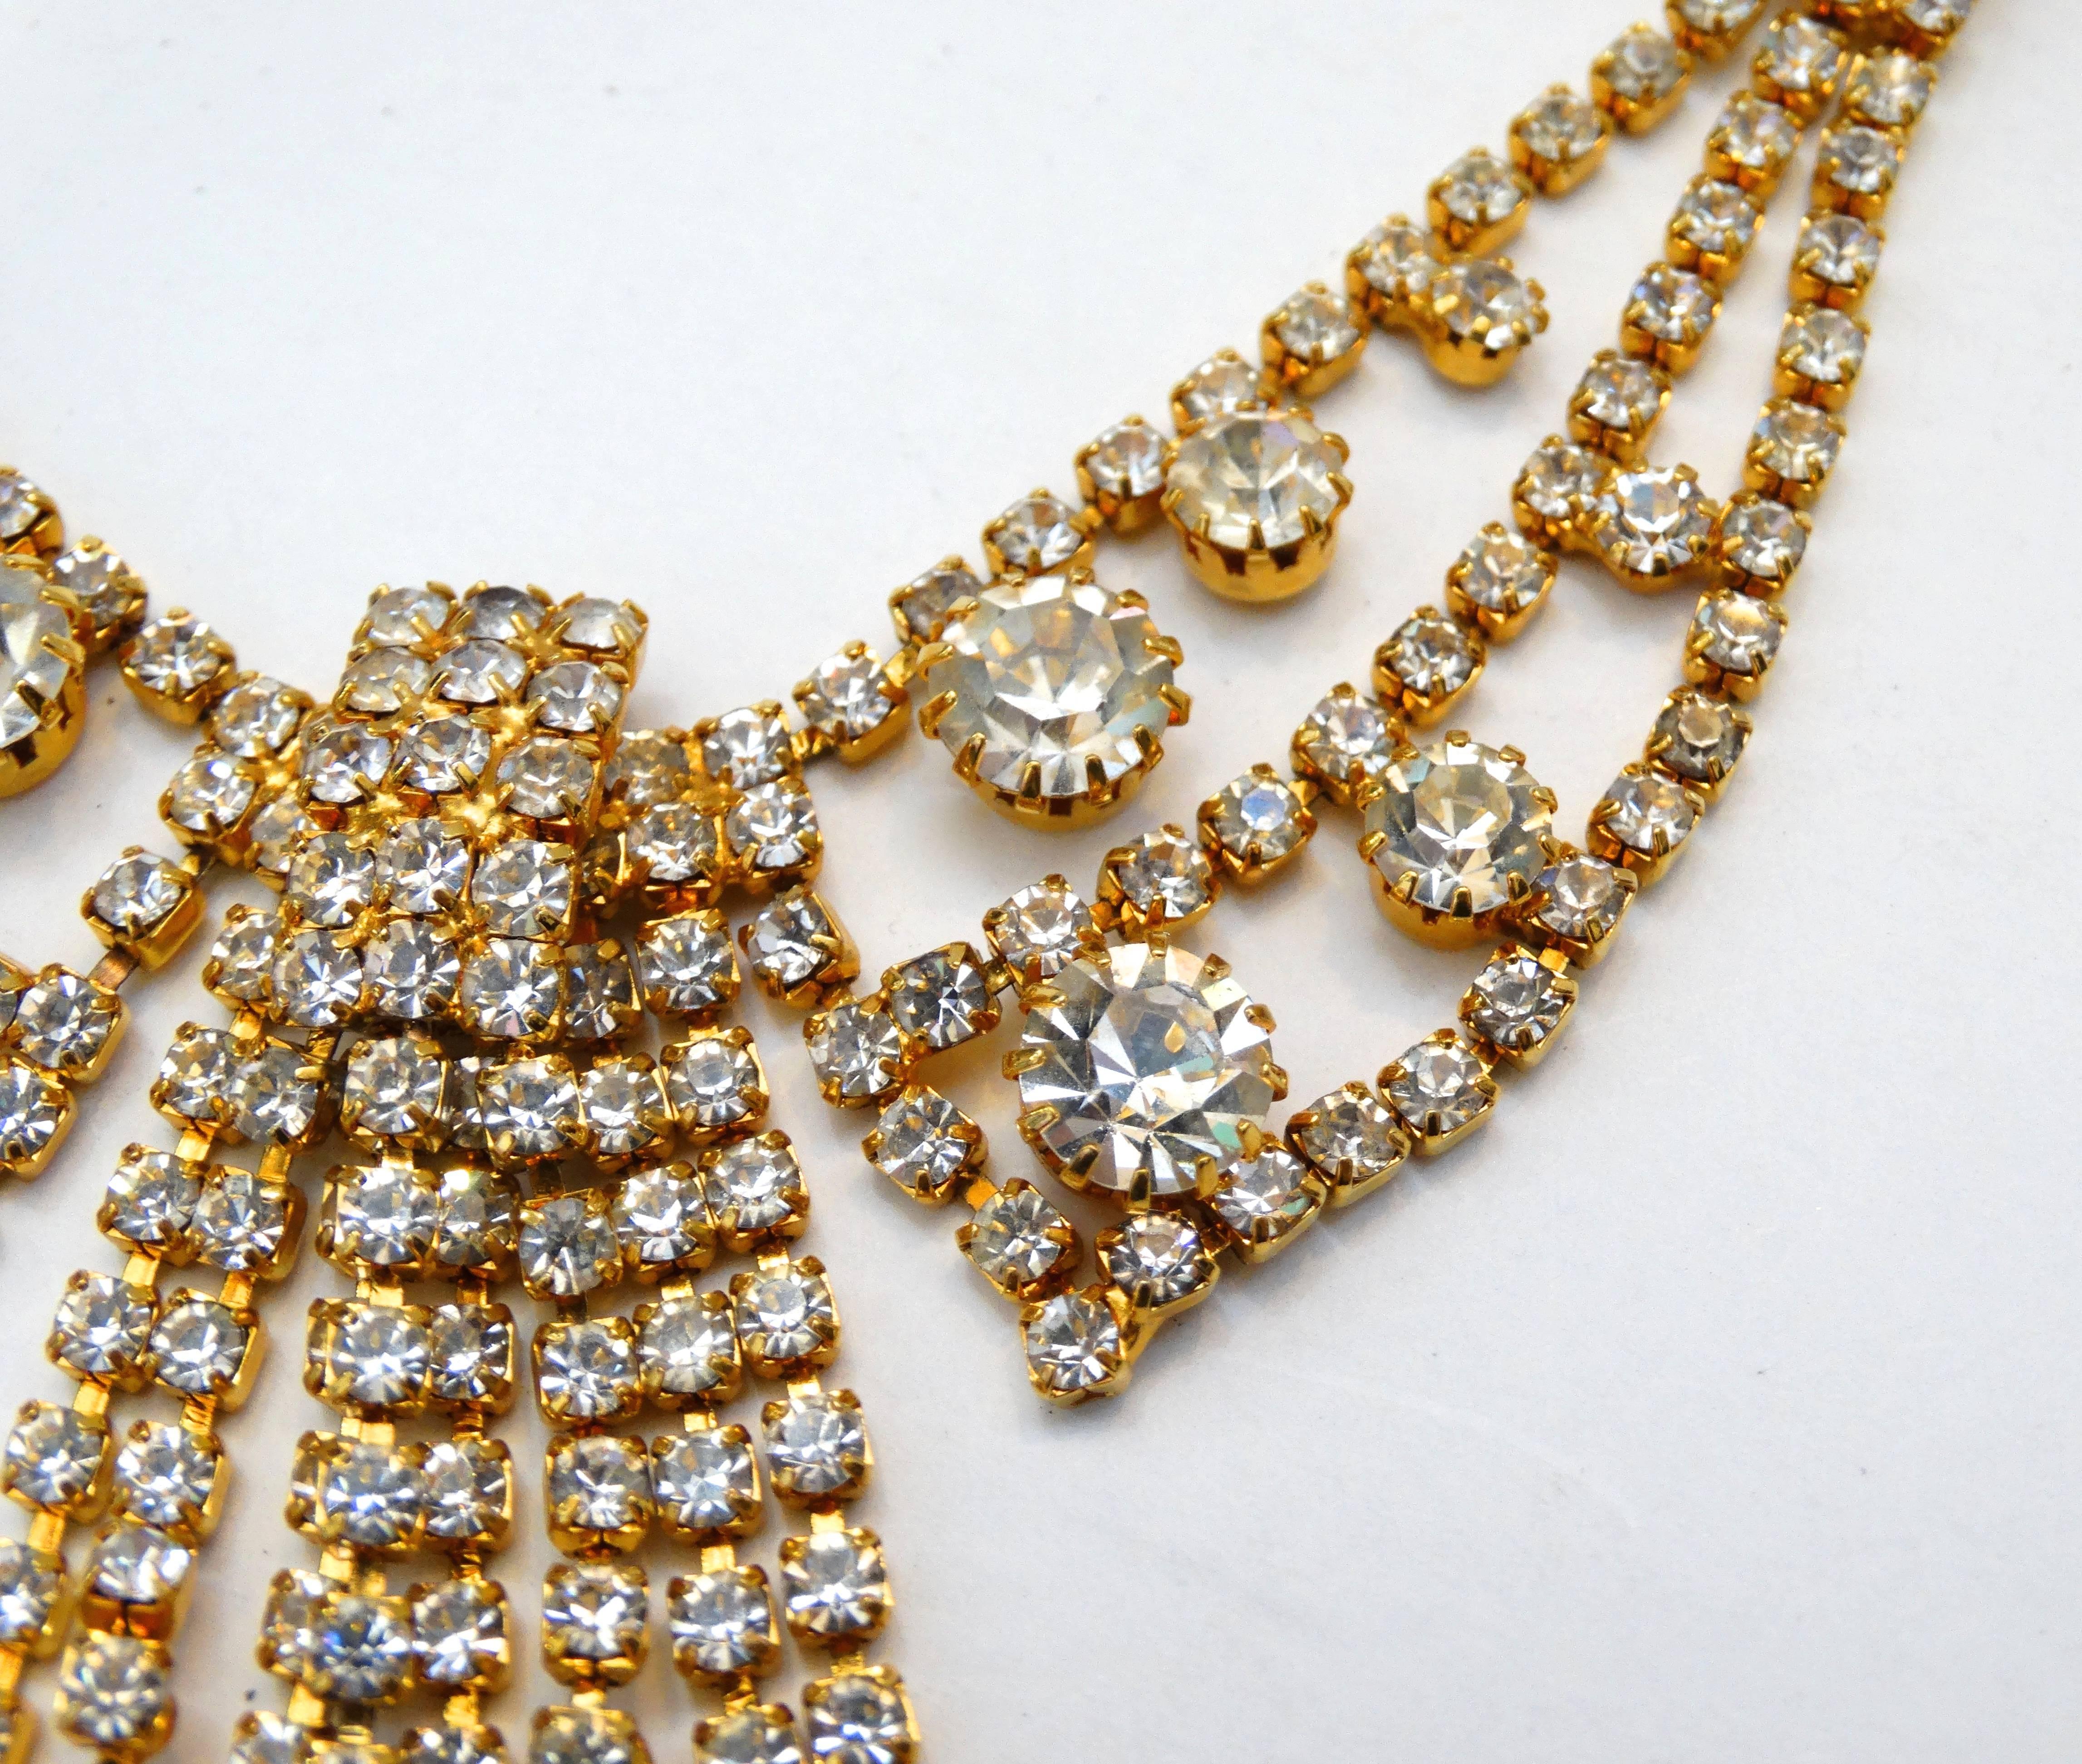 1960s Crystal & Rhinestone Bib Necklace  In Excellent Condition For Sale In Scottsdale, AZ